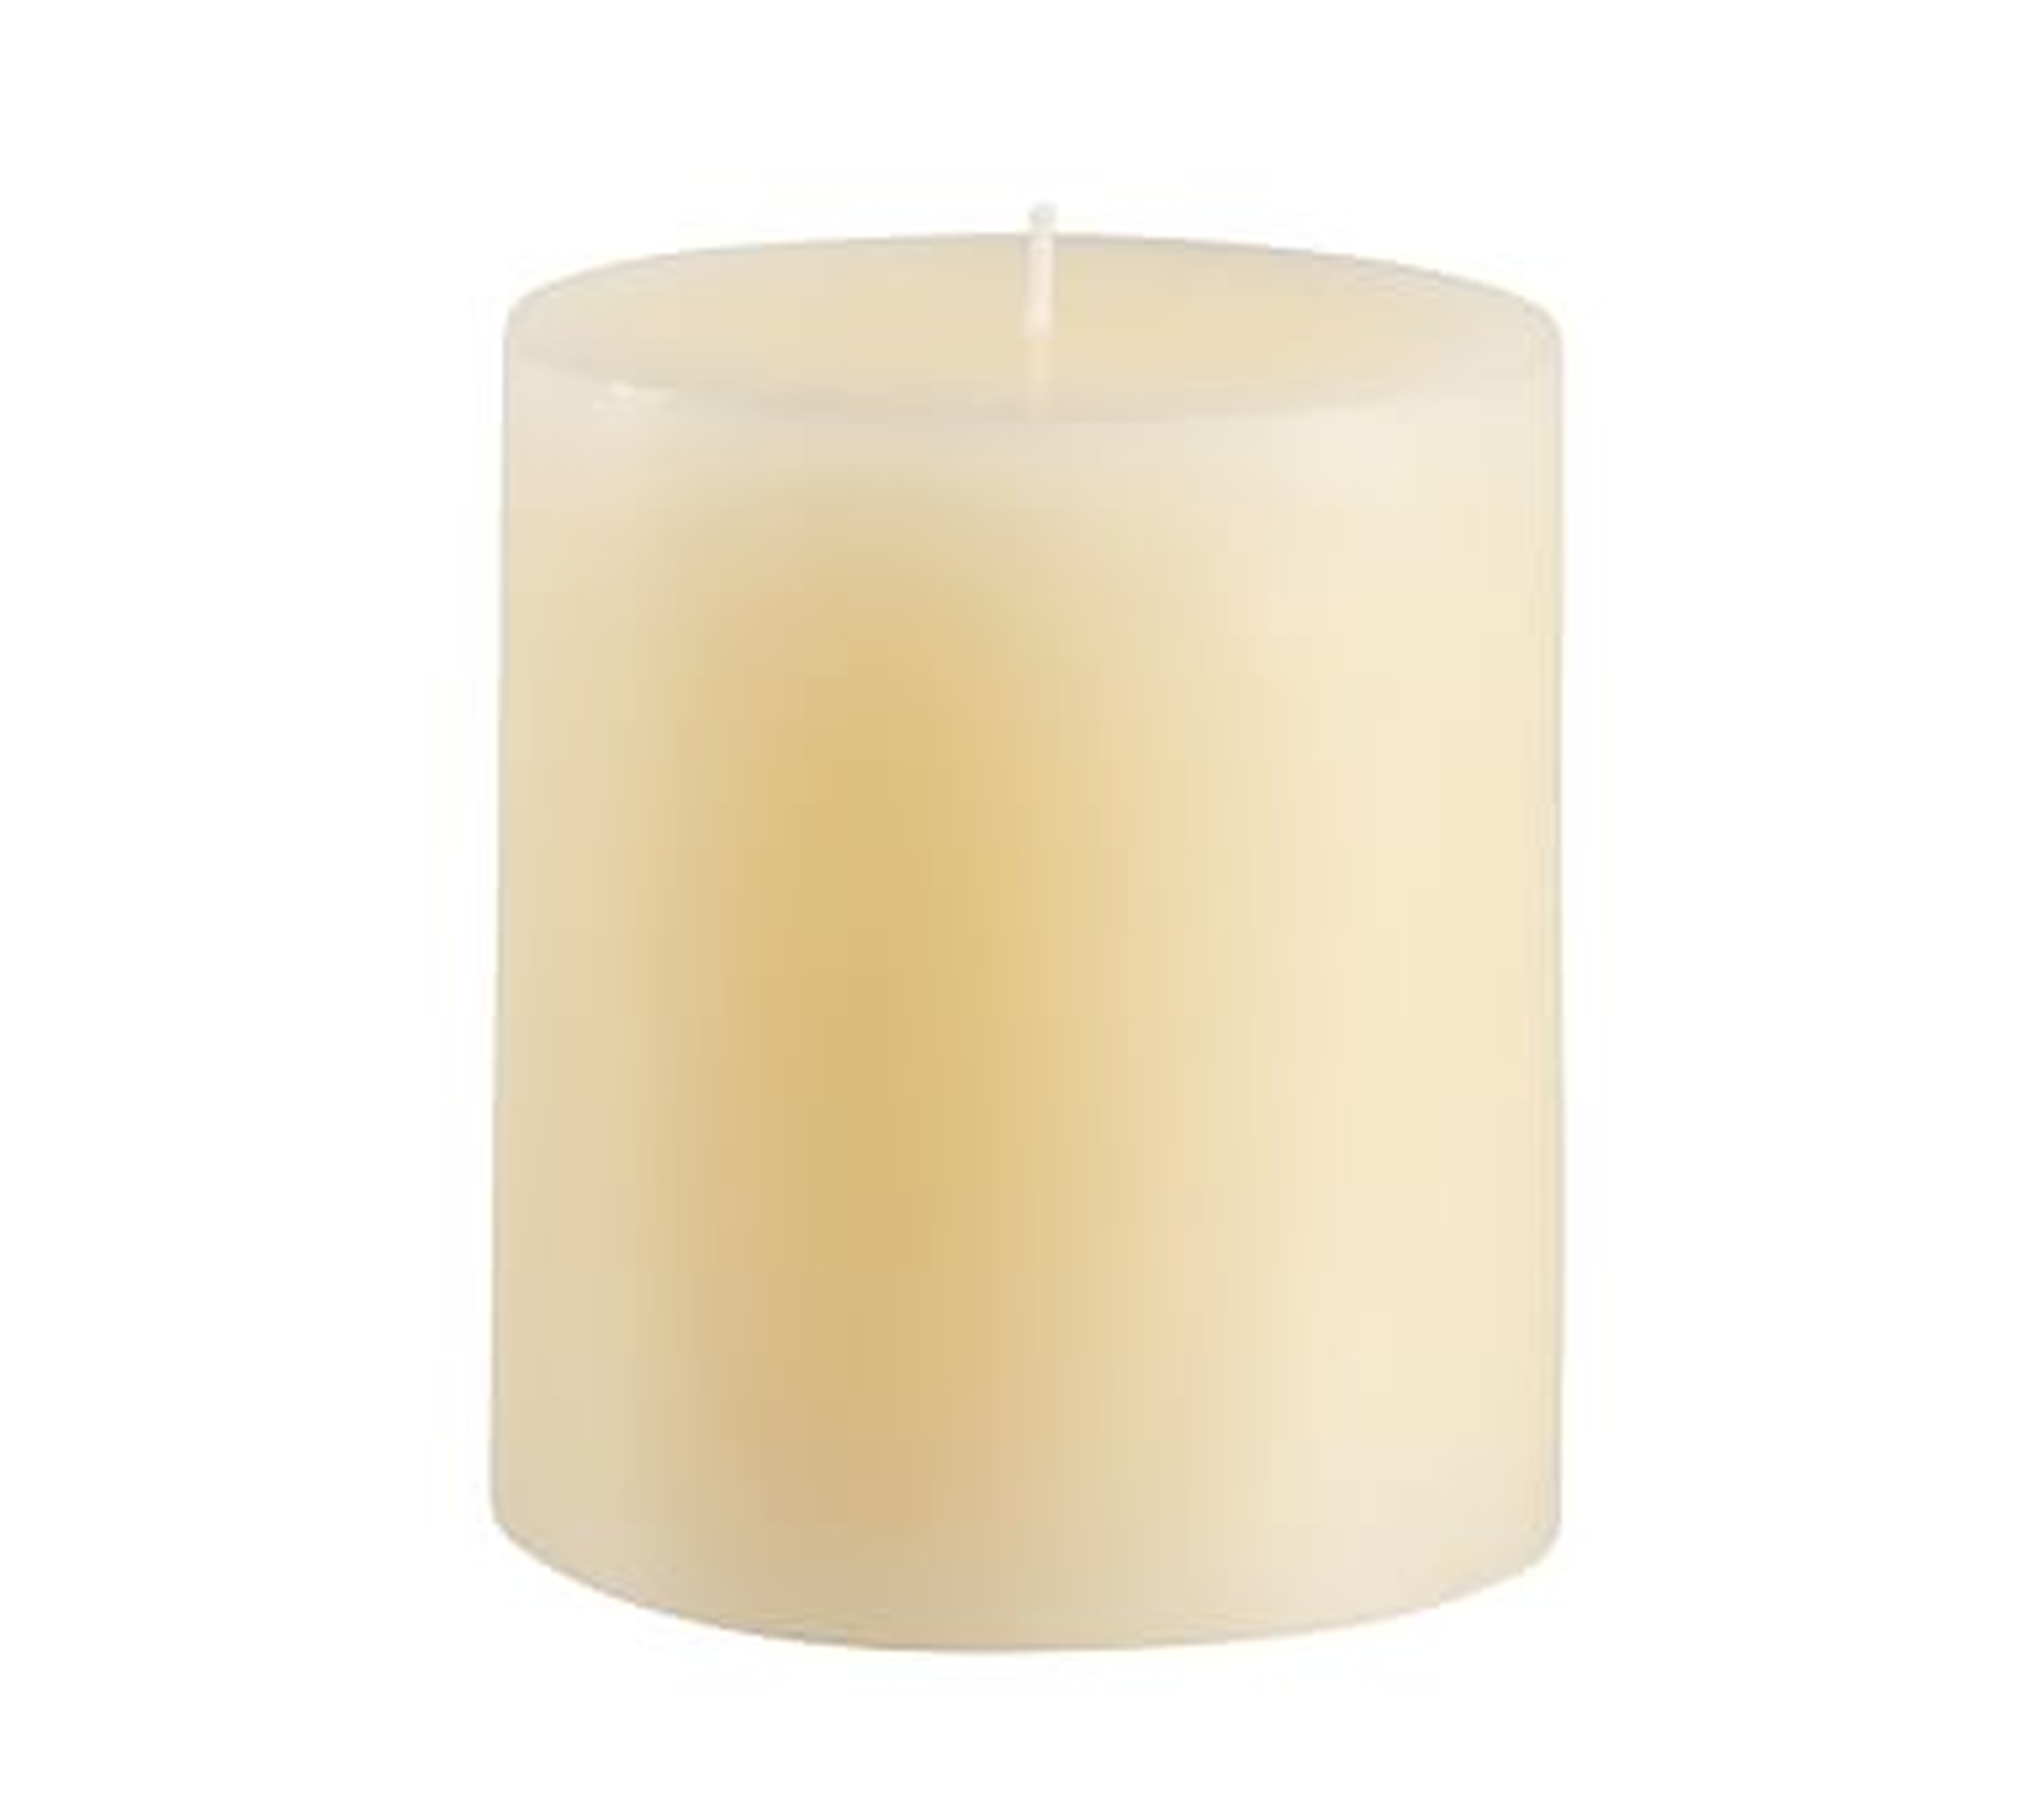 Unscented Wax Pillar Candle, 4"x4.5" - Ivory - Pottery Barn